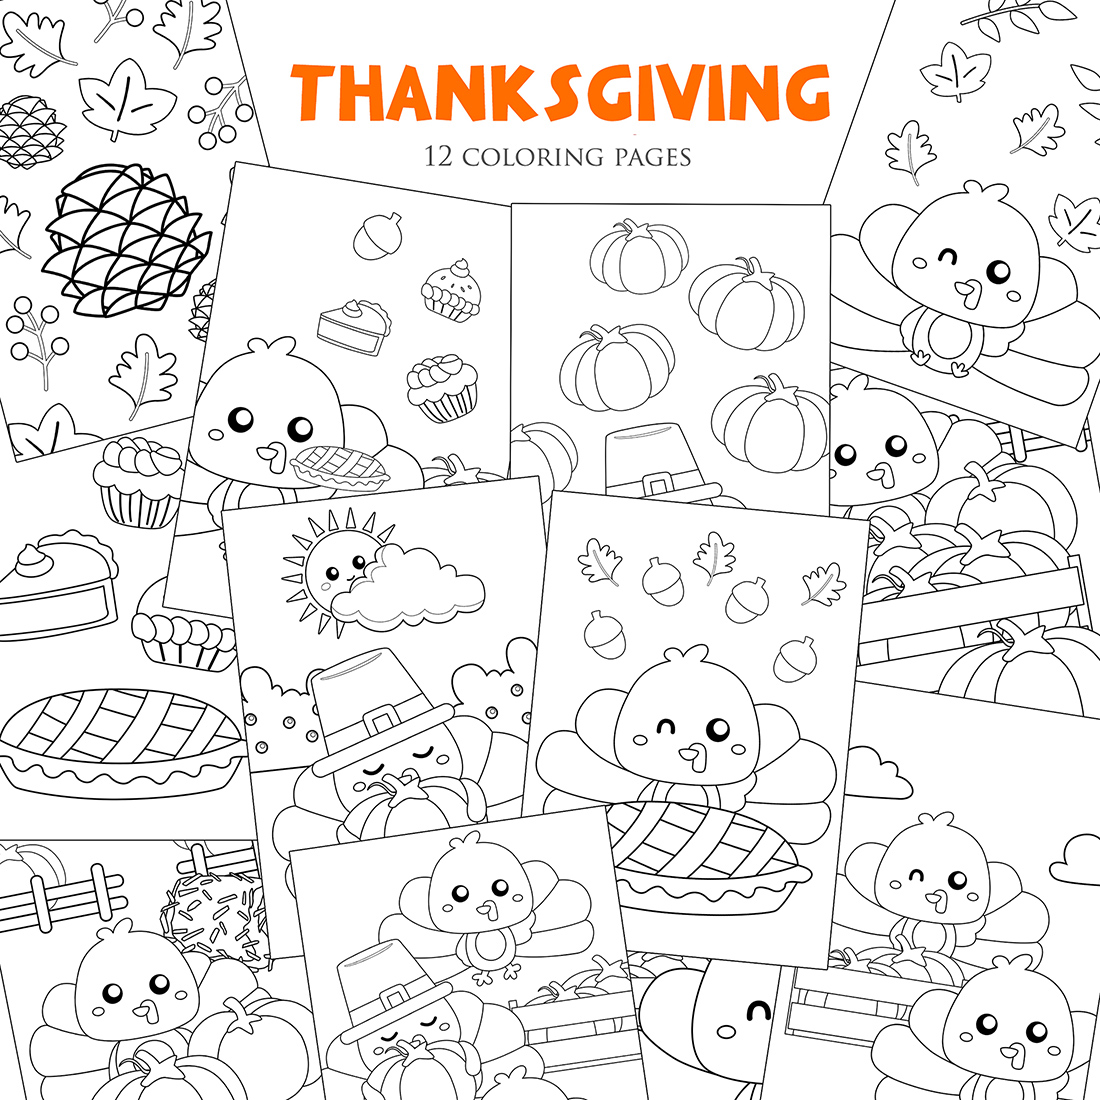 Free Cooking Coloring Pages for Kids